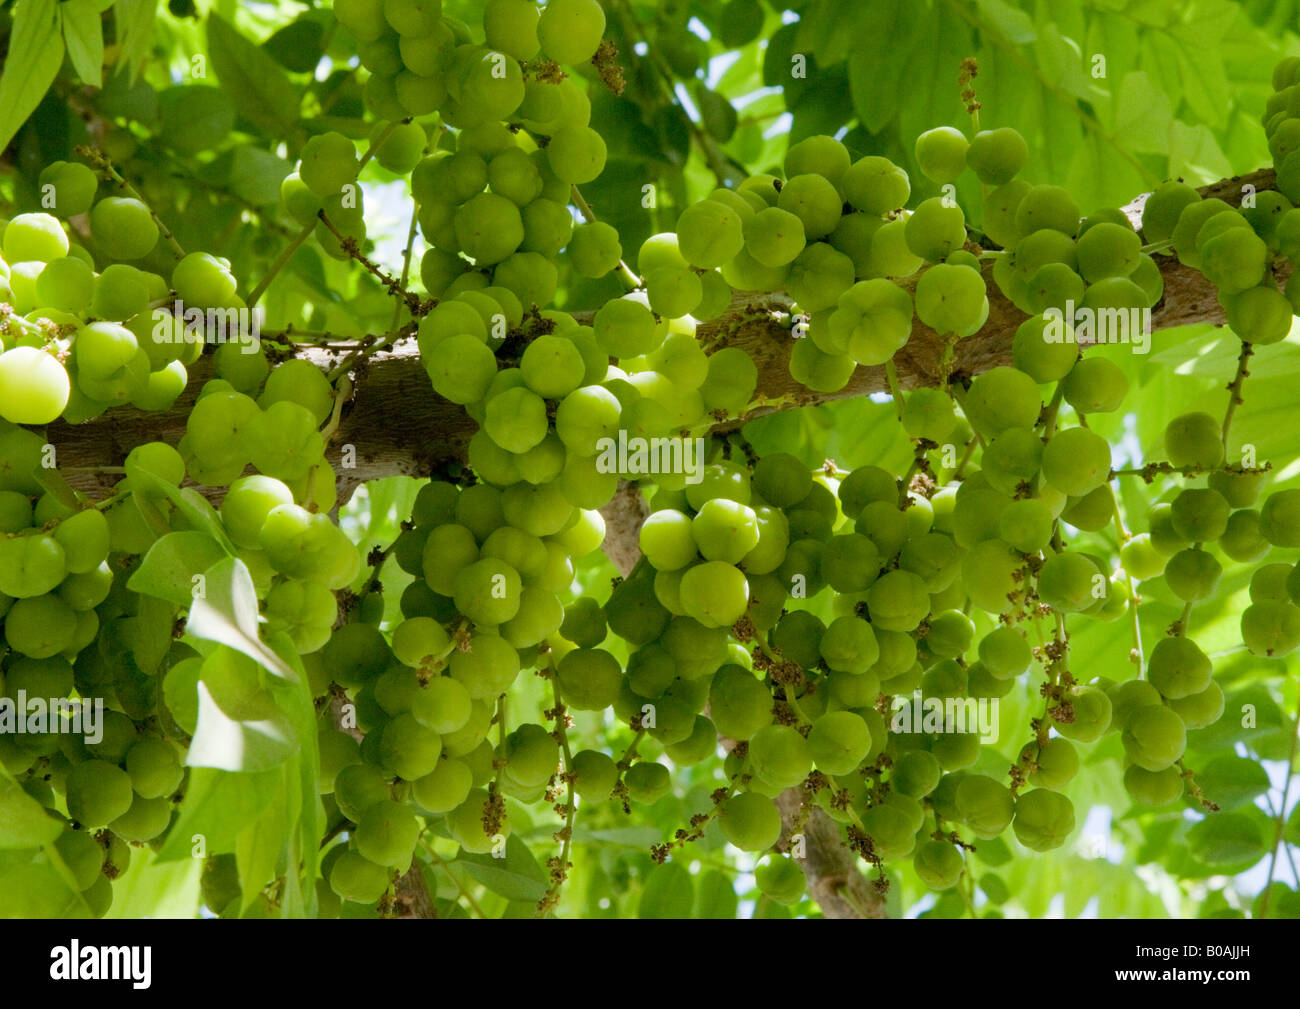 Amla fruit known as Indian gooseberry, being one of the most healthy fruit of India, seen here growing successfully on its tree. Stock Photo